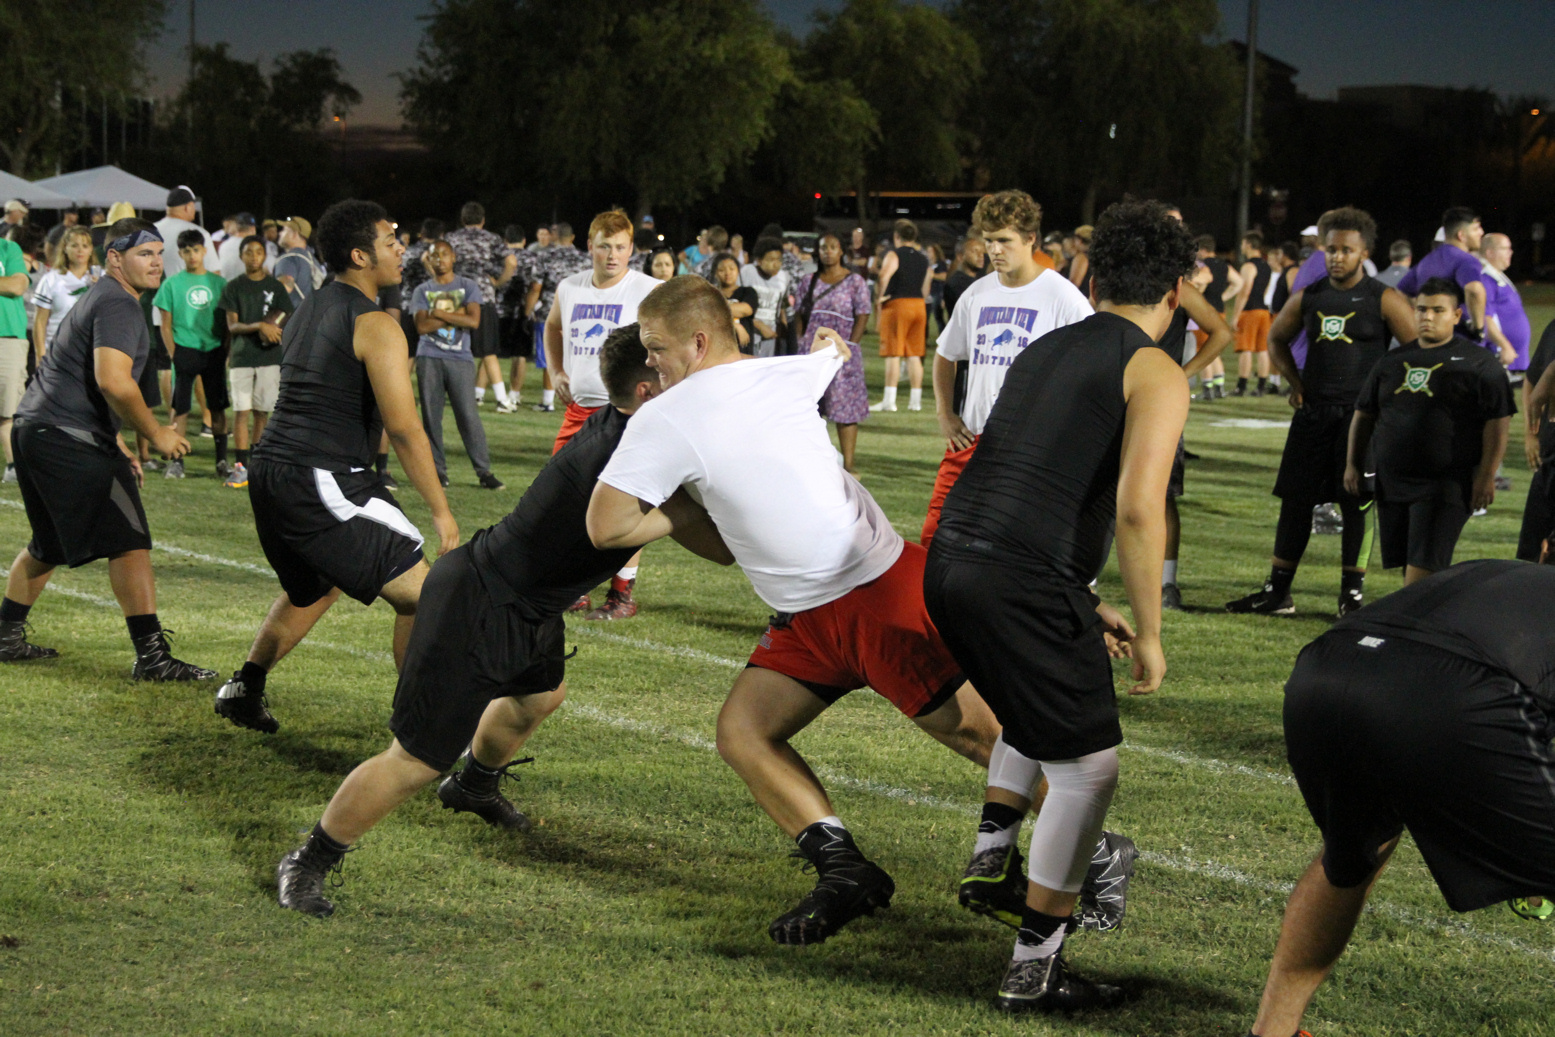 Group of football players tackling each other